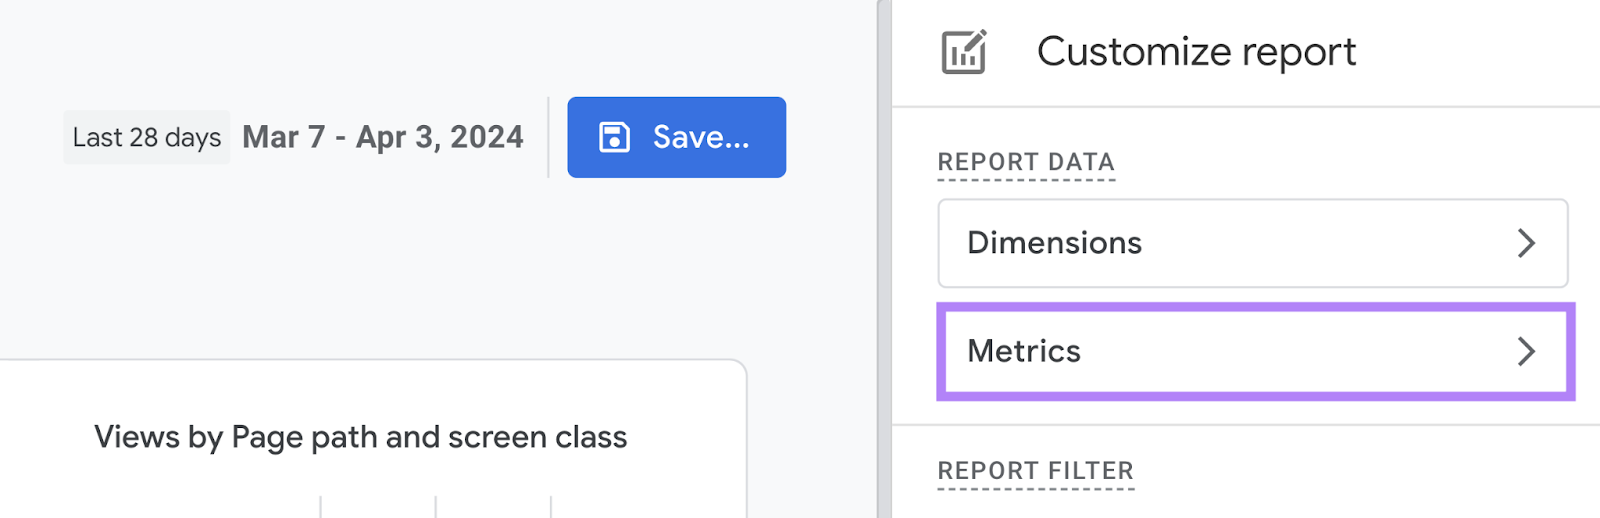 “Metrics” highlighted nether  the “Report Data” section